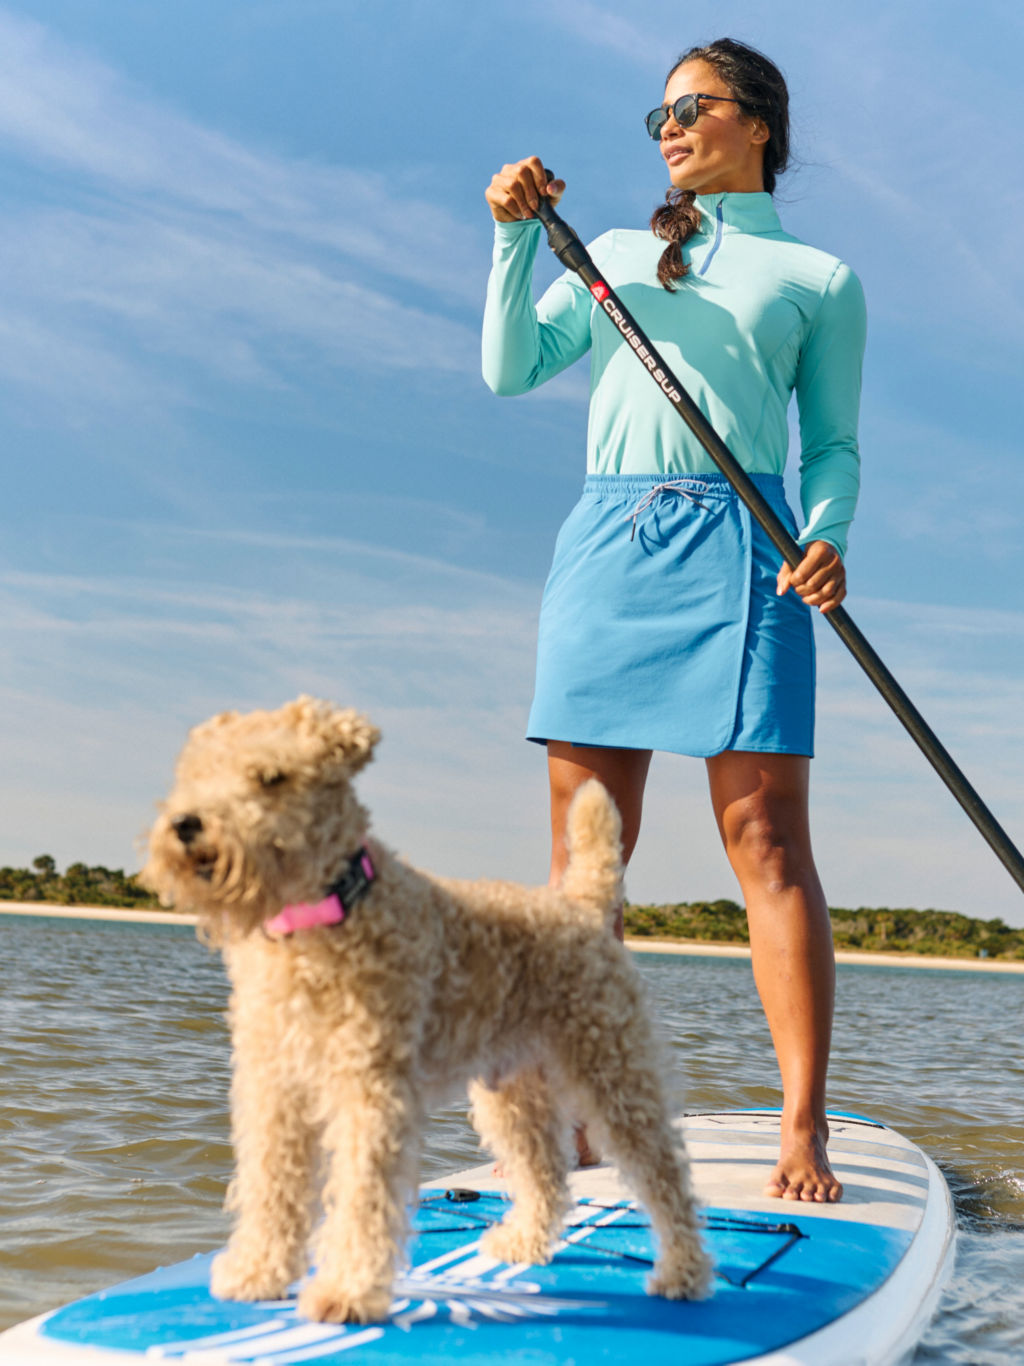 A woman wearing turquoise sun protection clothing stands on a paddle board with her fluffy-coated dog.